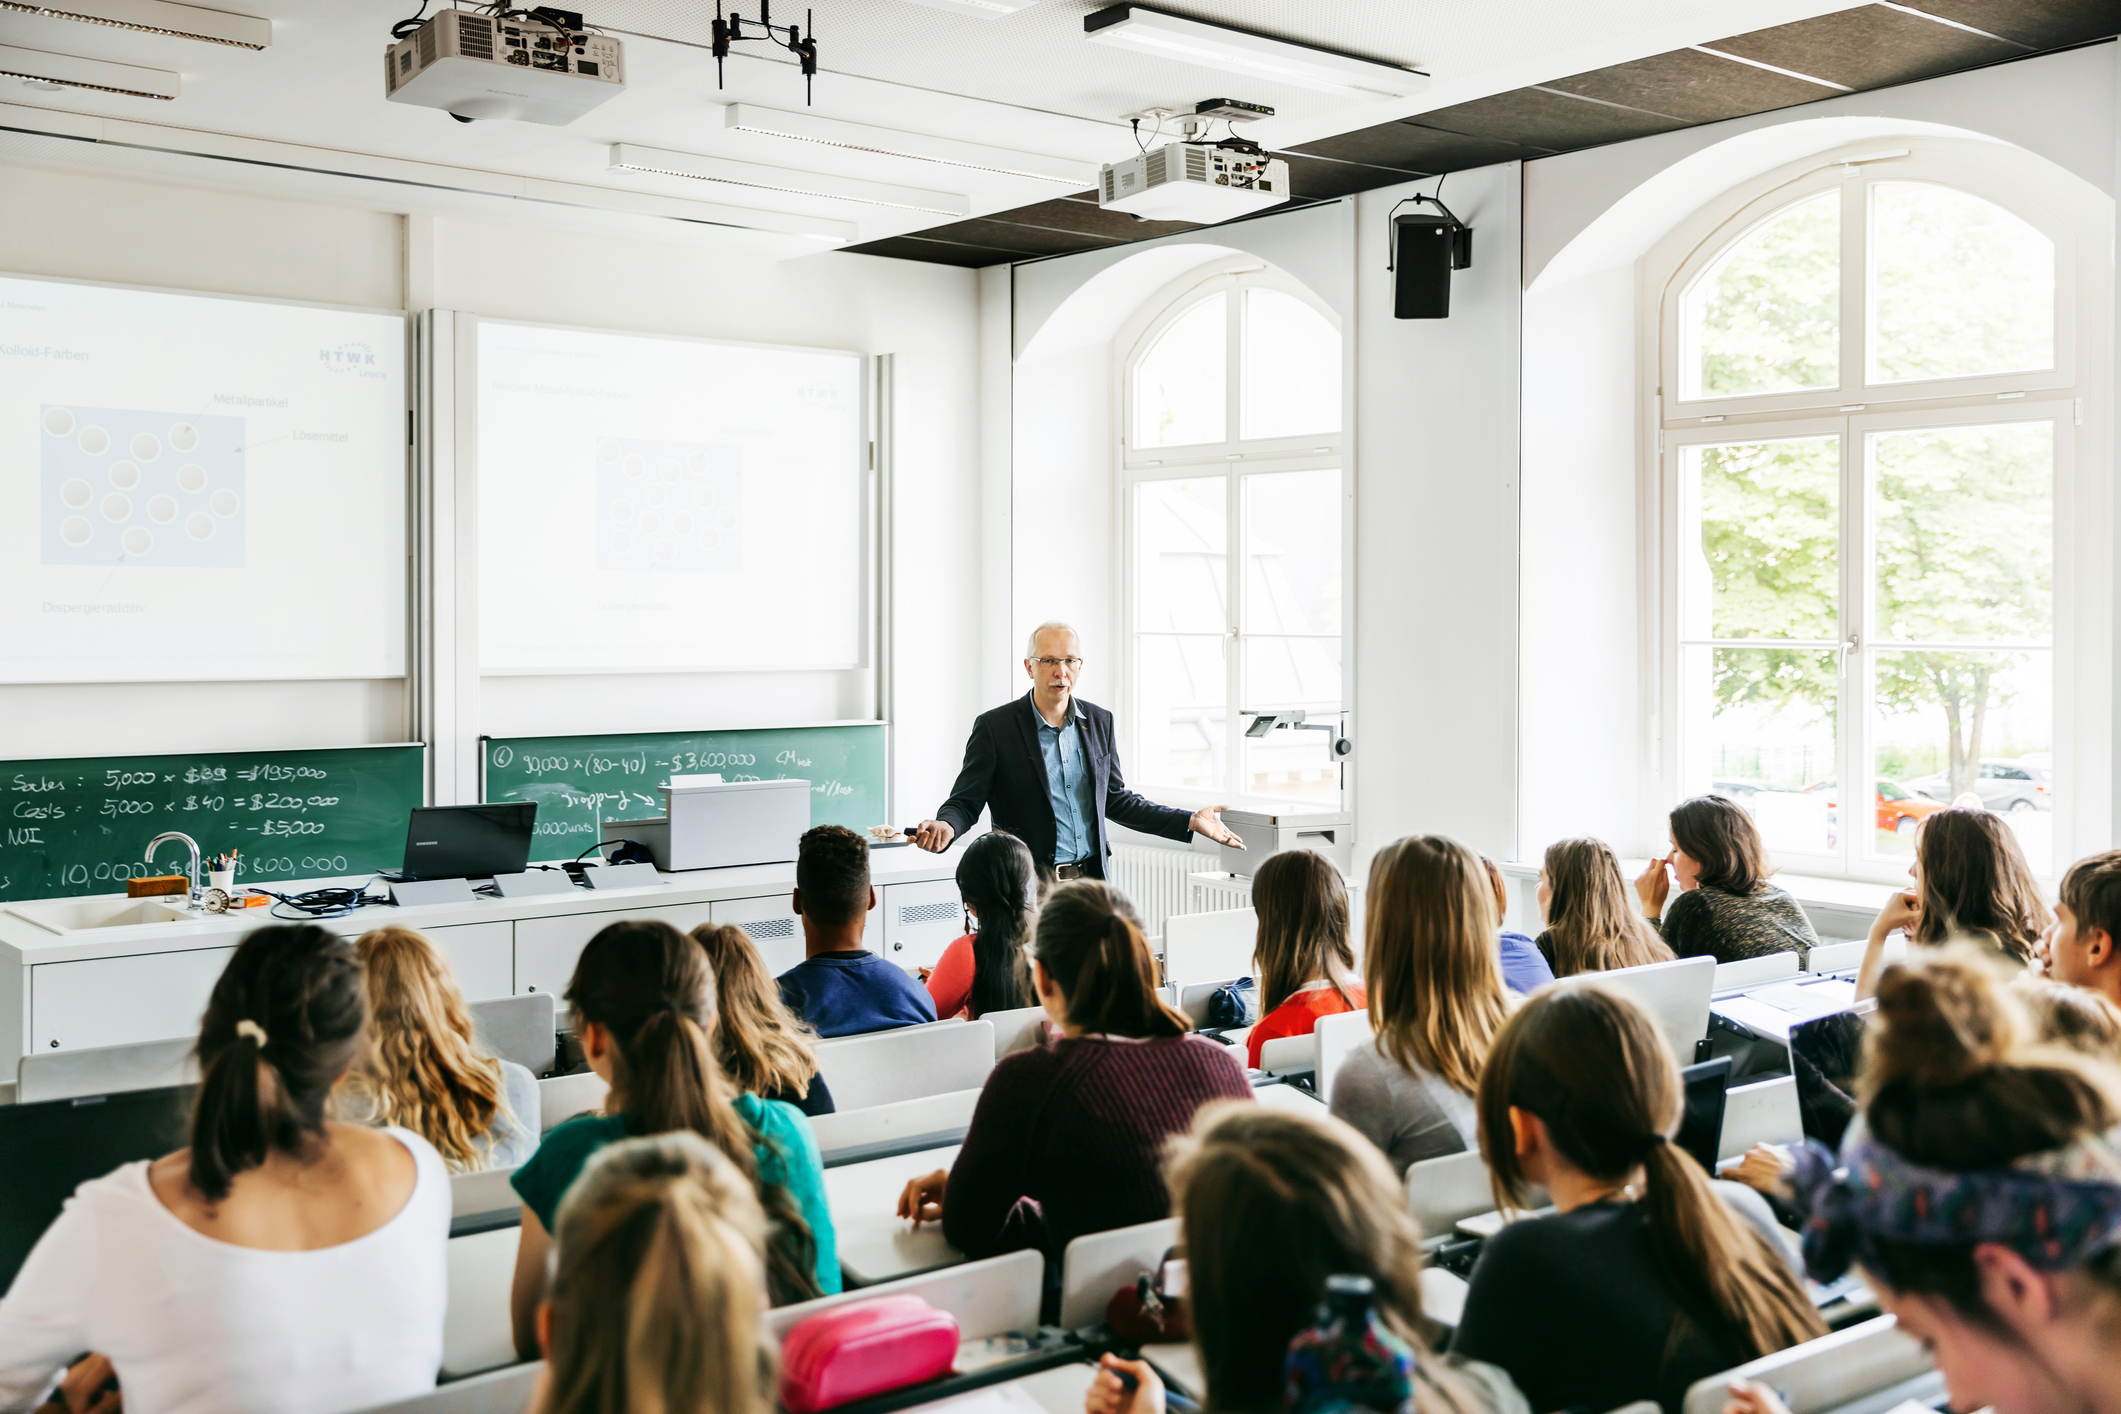 Professor lecturing in a university classroom to attentive students